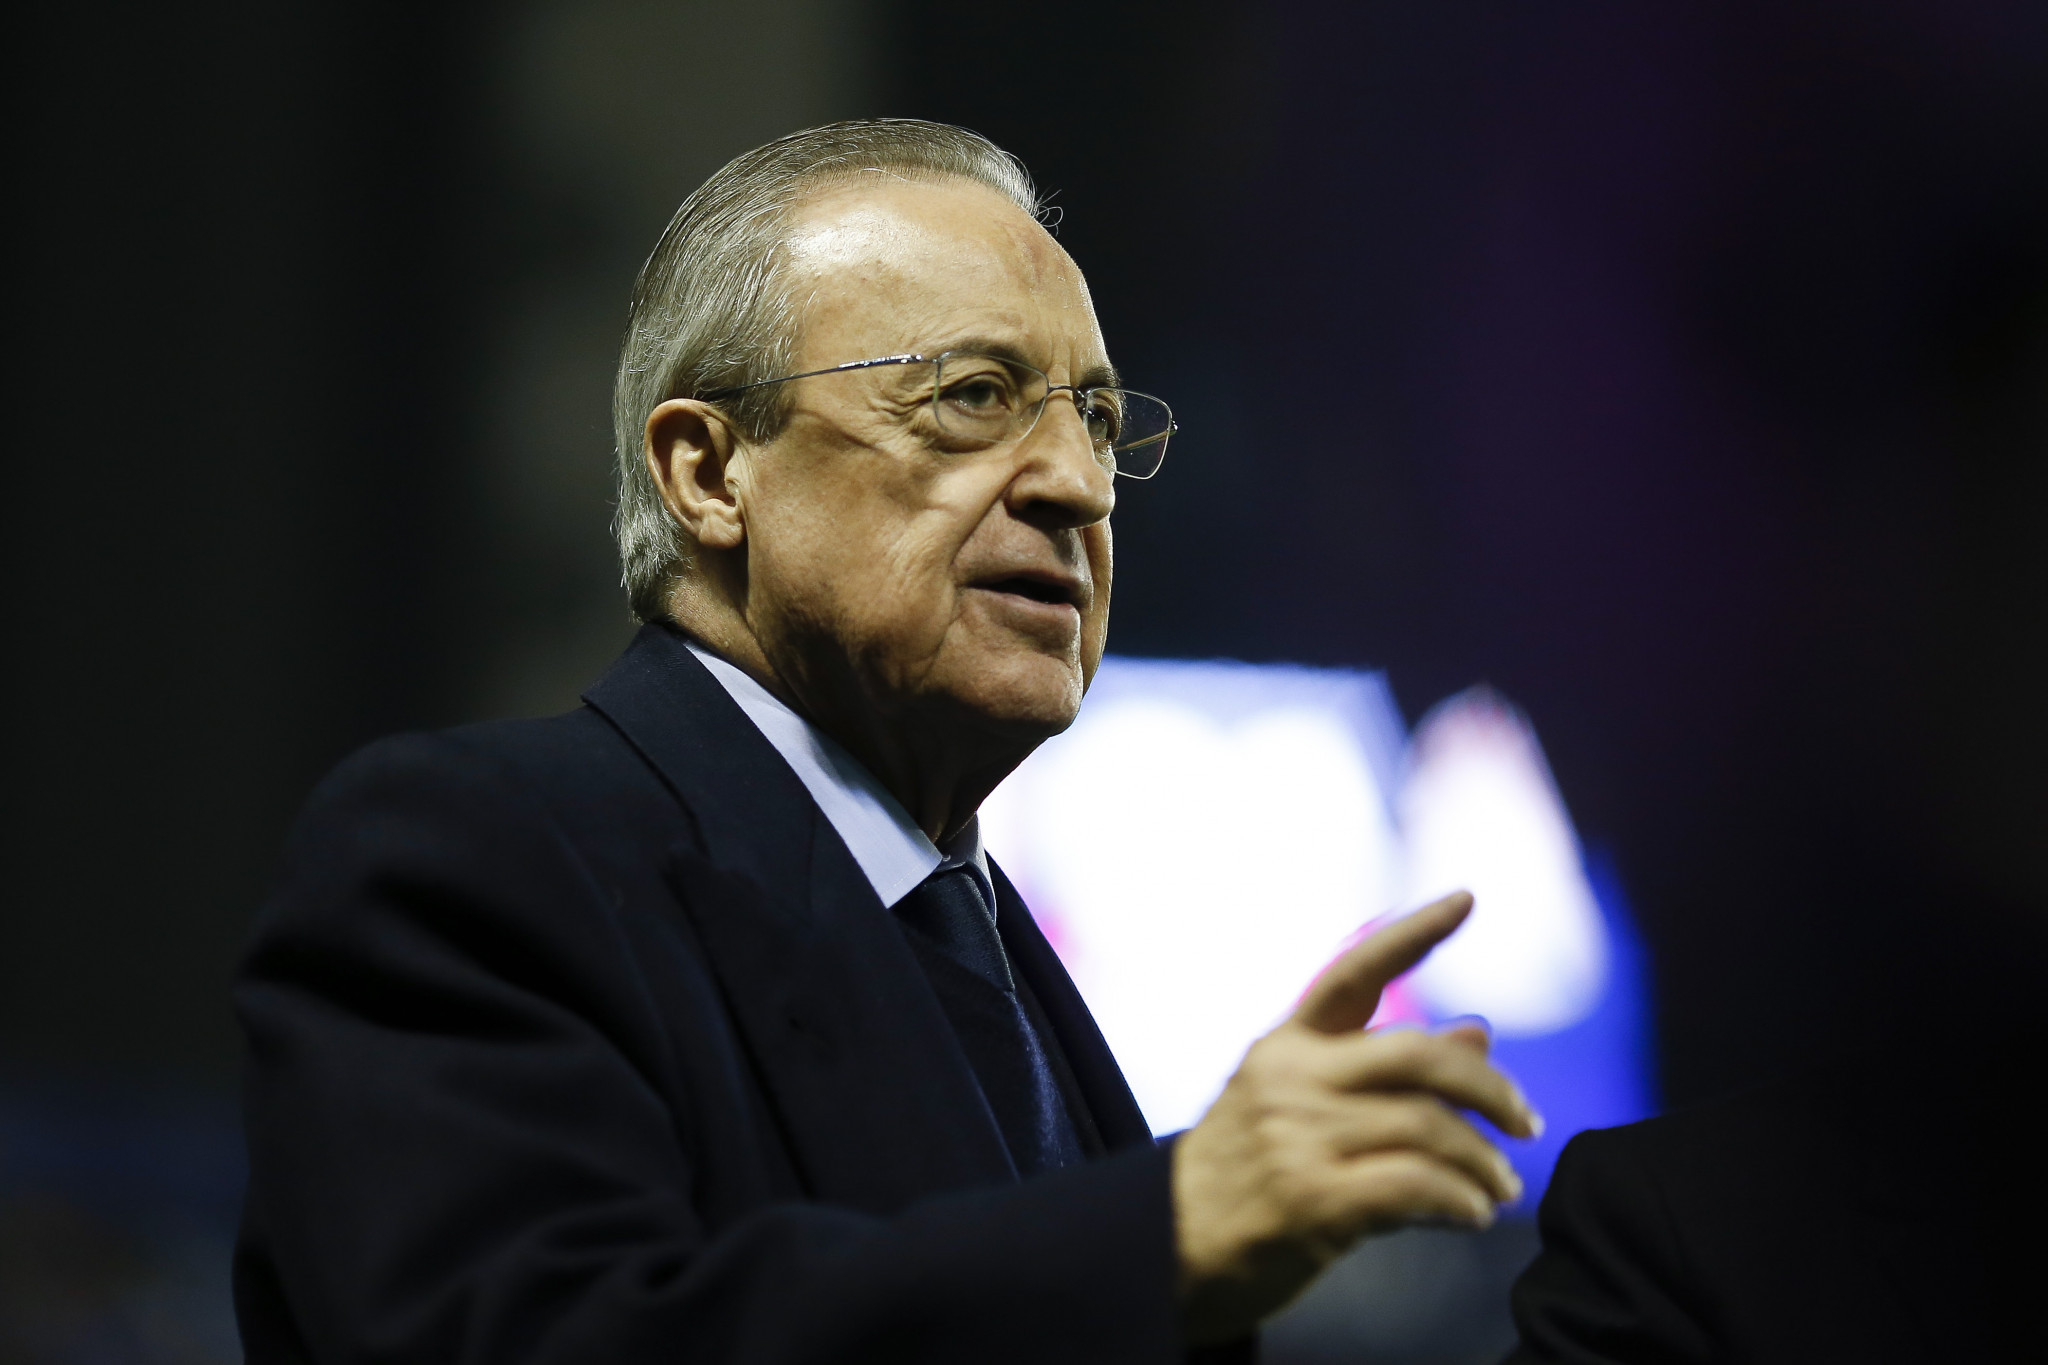 Real Madrid President Florentino Perez lead the Super League project that threatened UEFA ©Getty Images